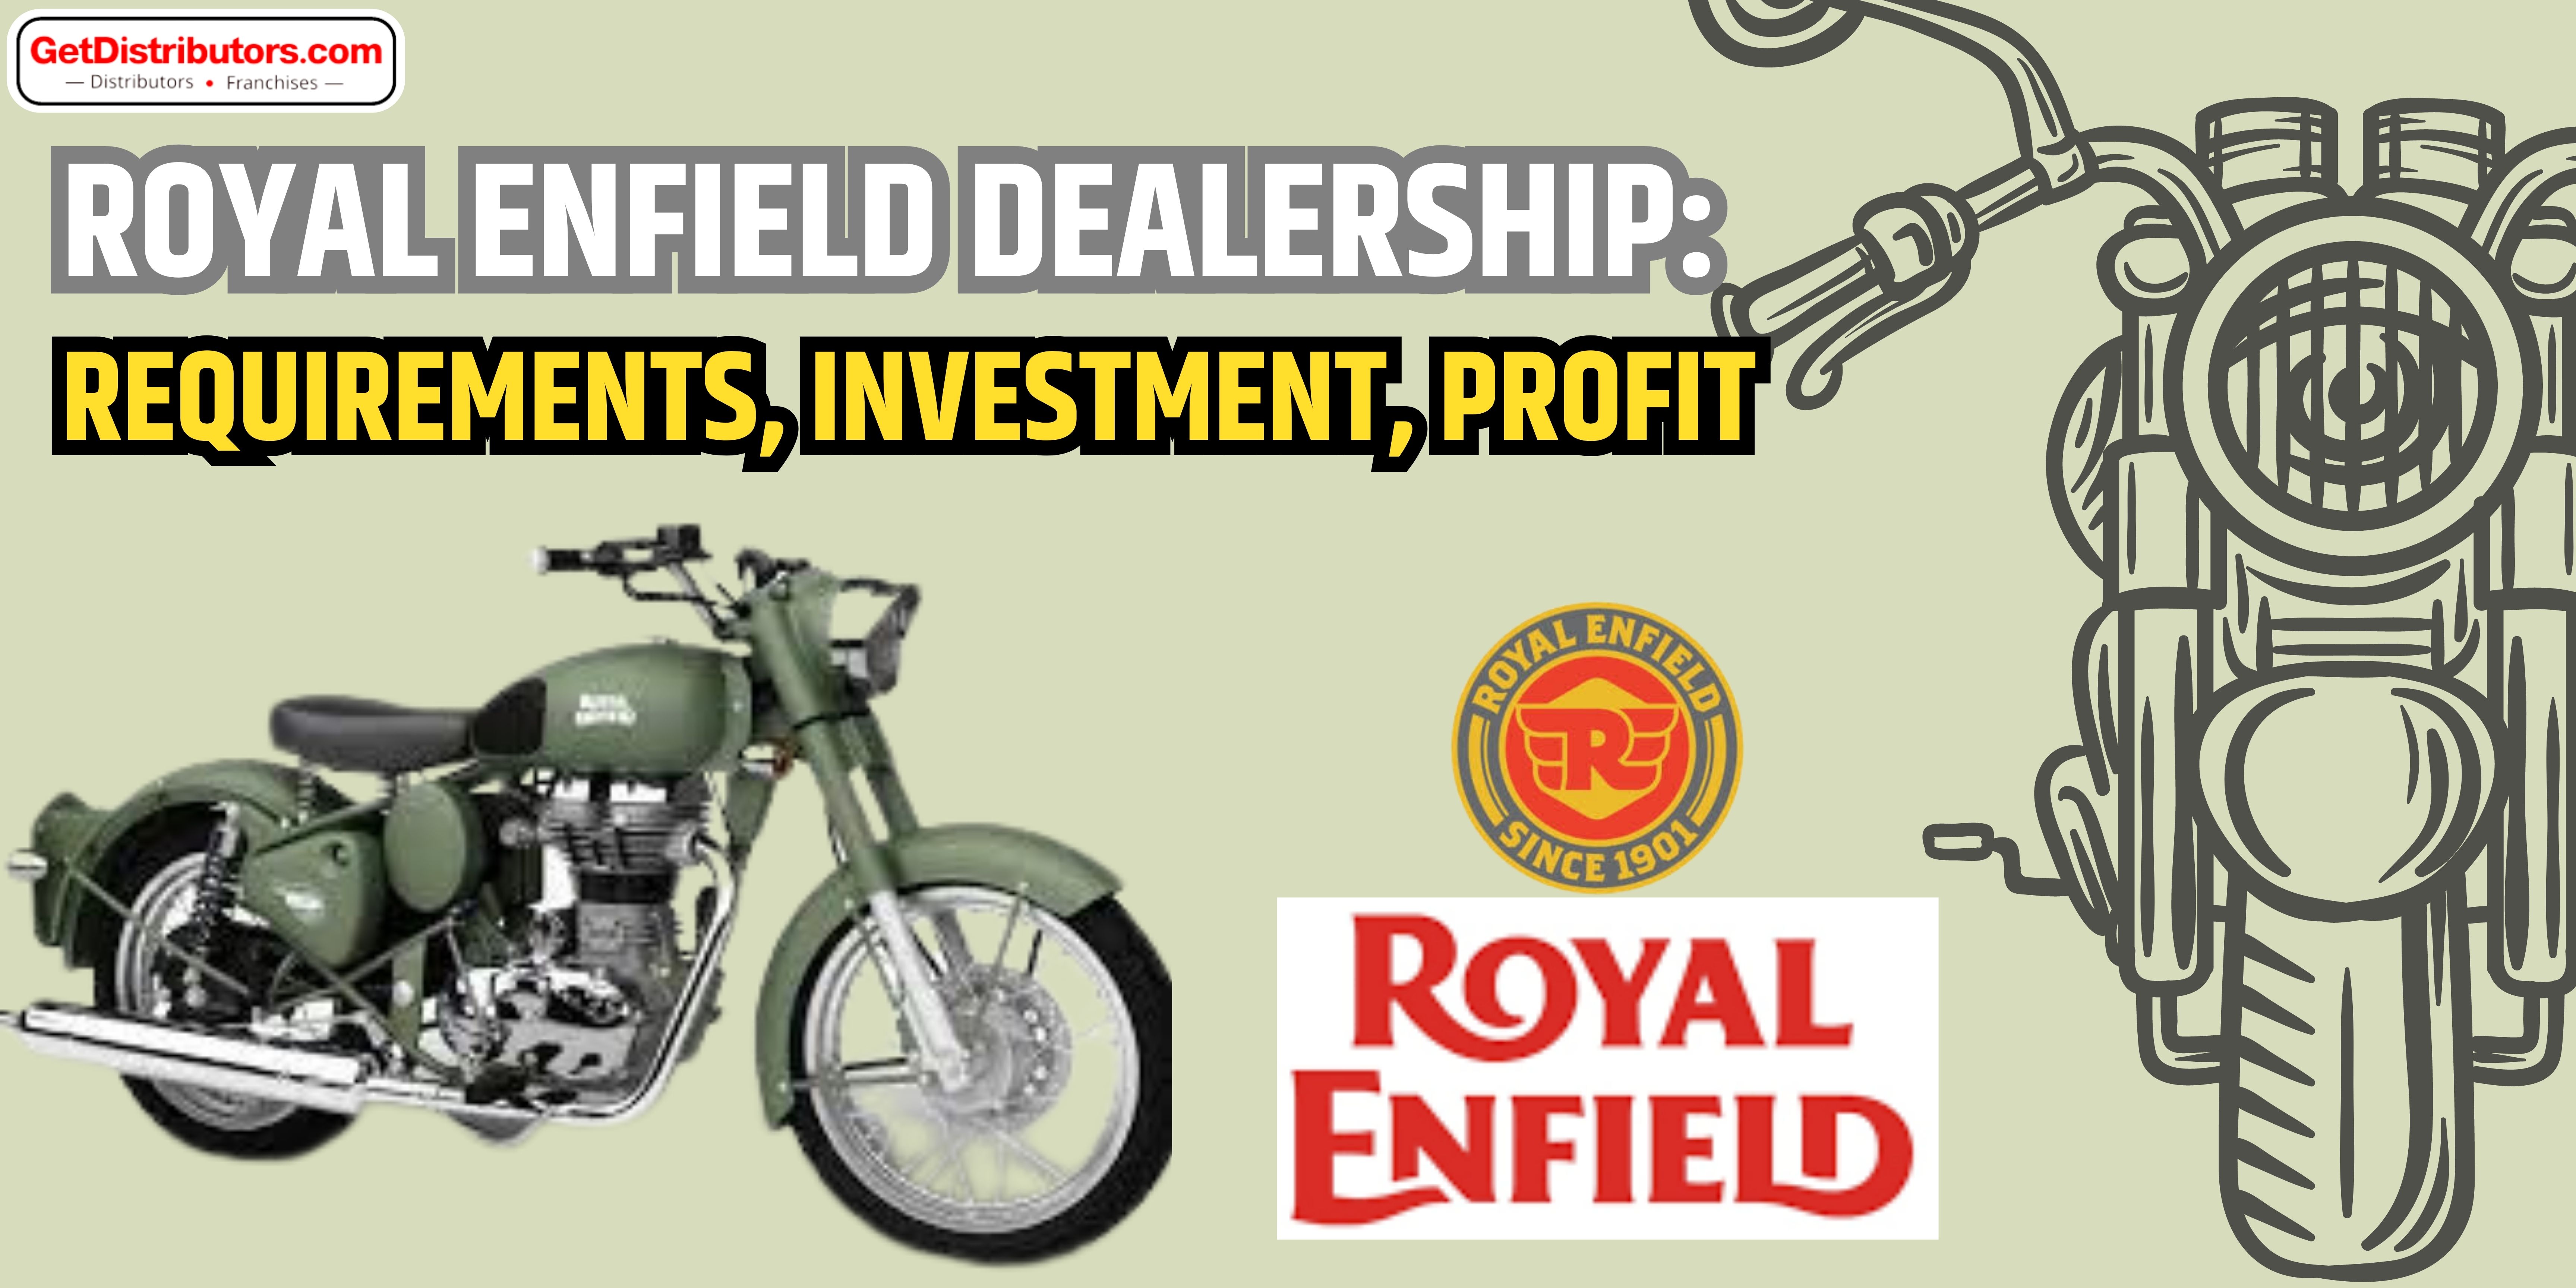 Royal Enfield Dealership: Requirements, Investment, Profit